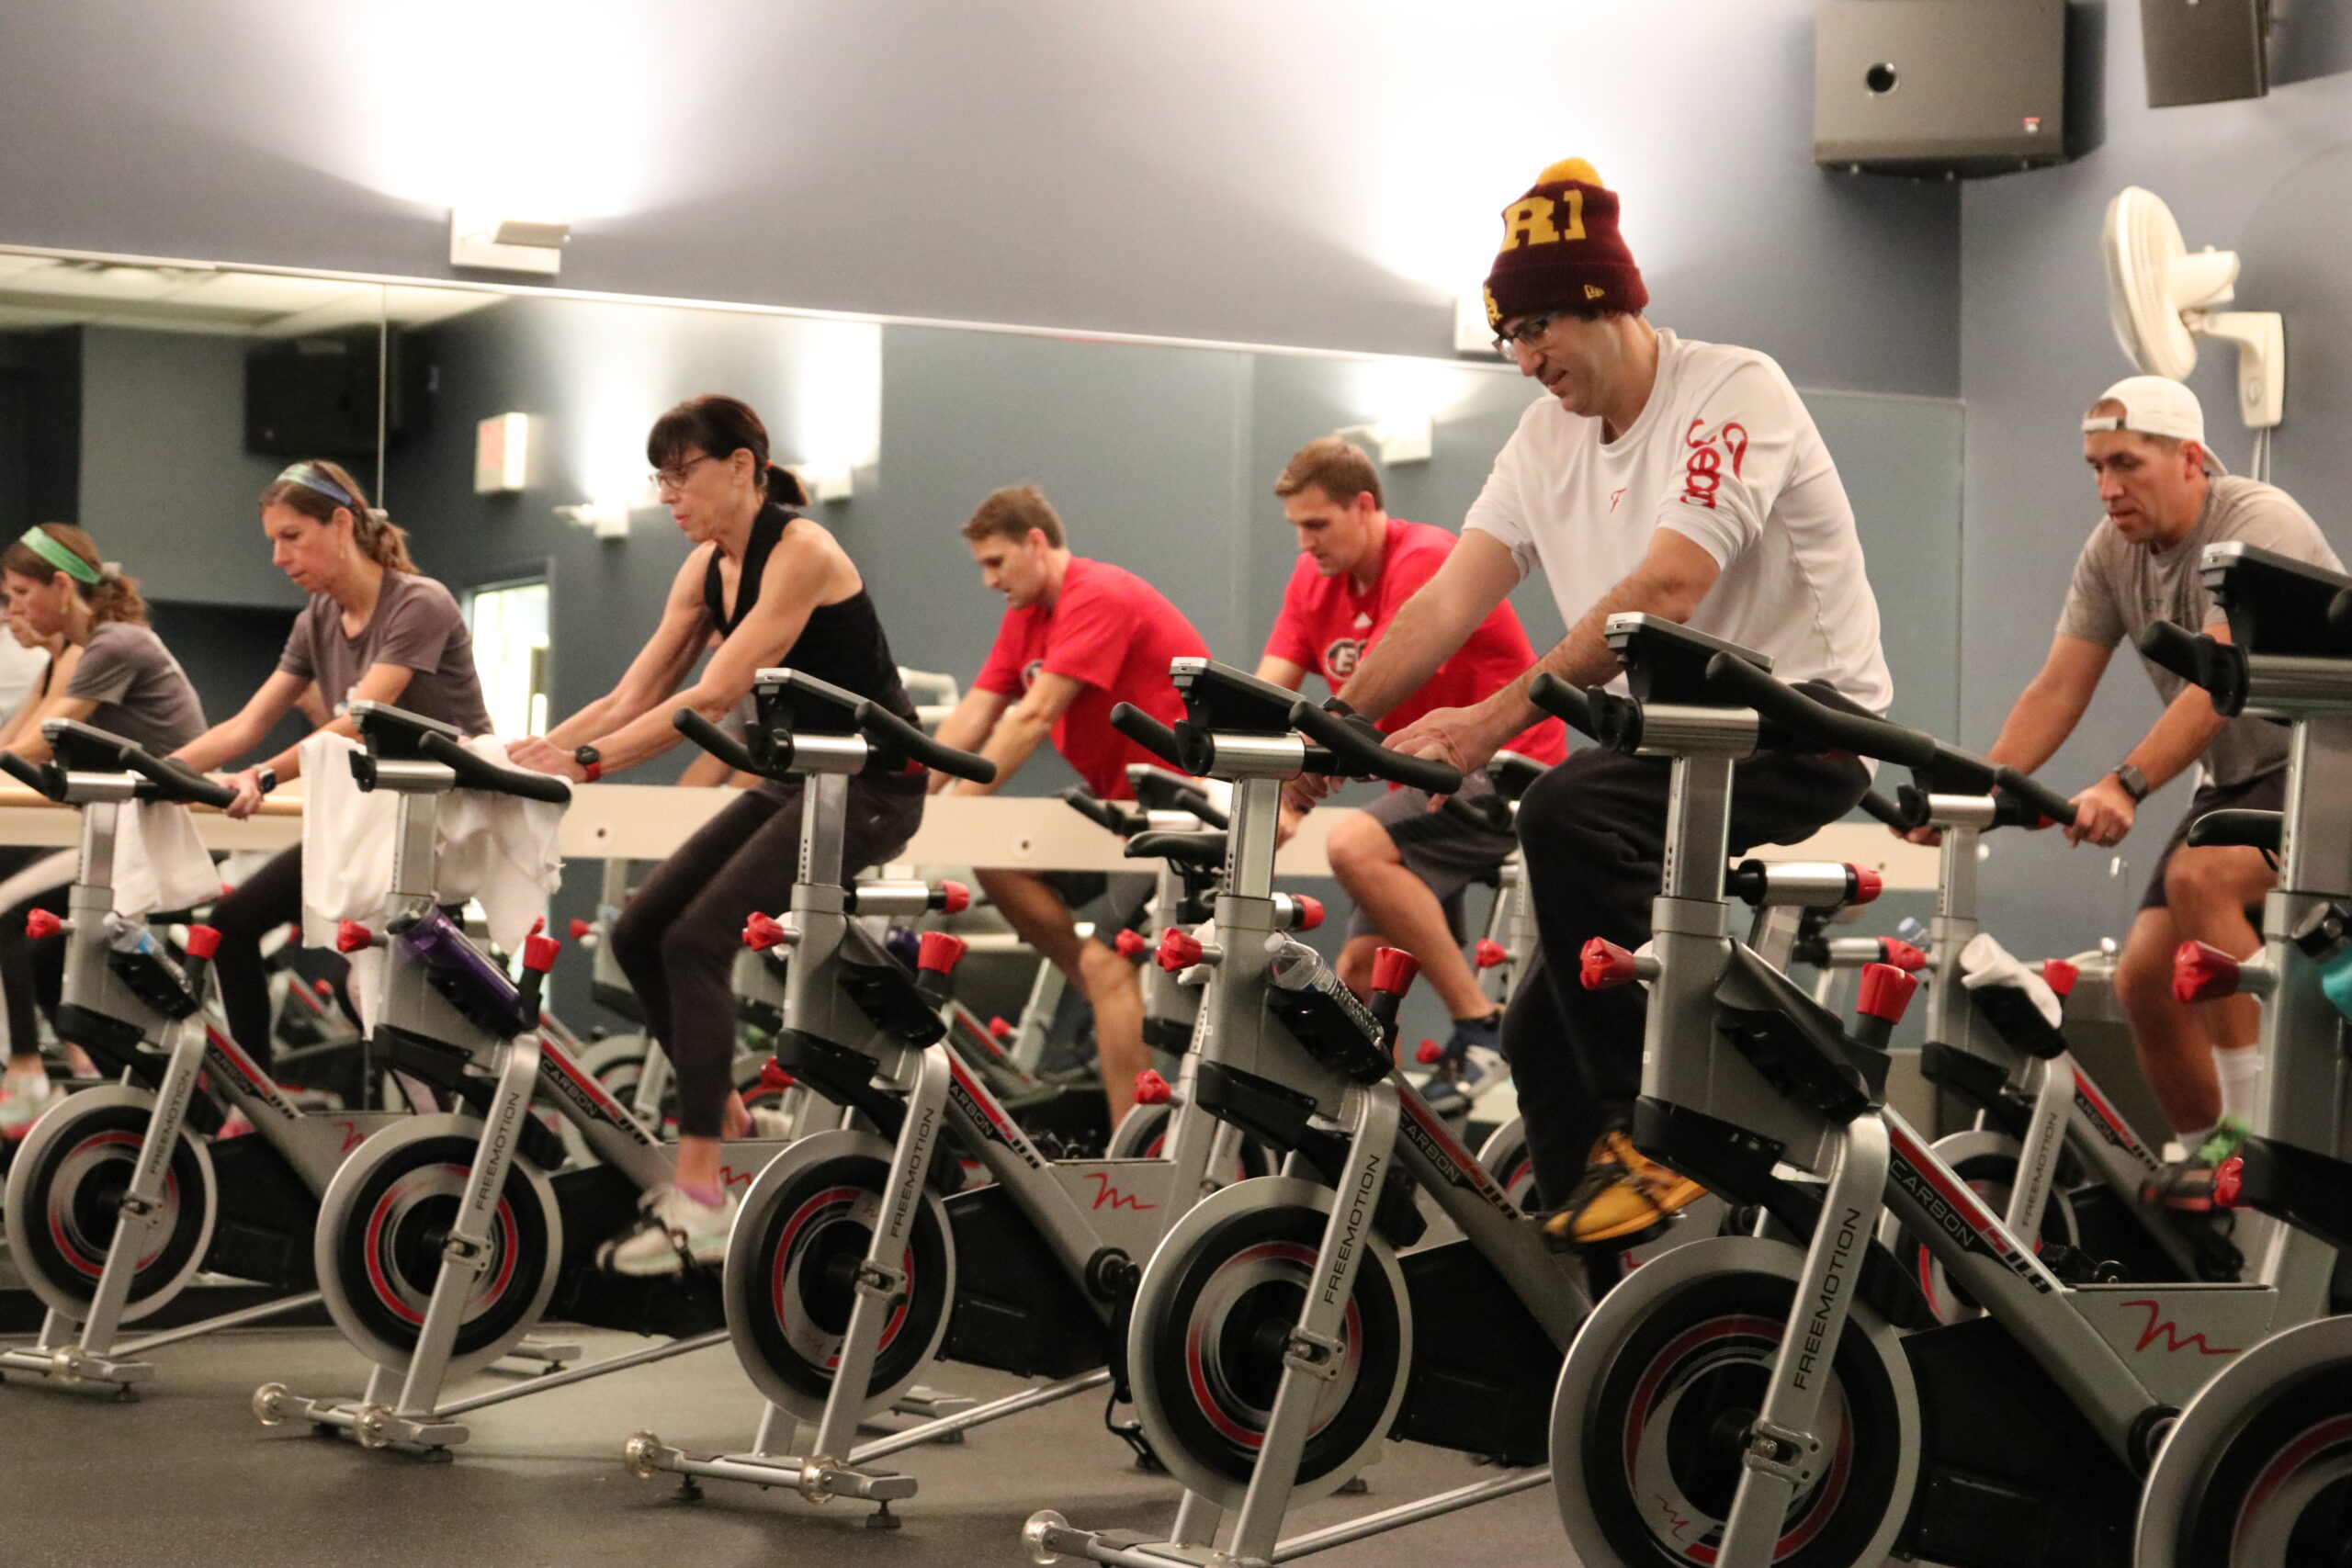 Group of people on exercise bikes